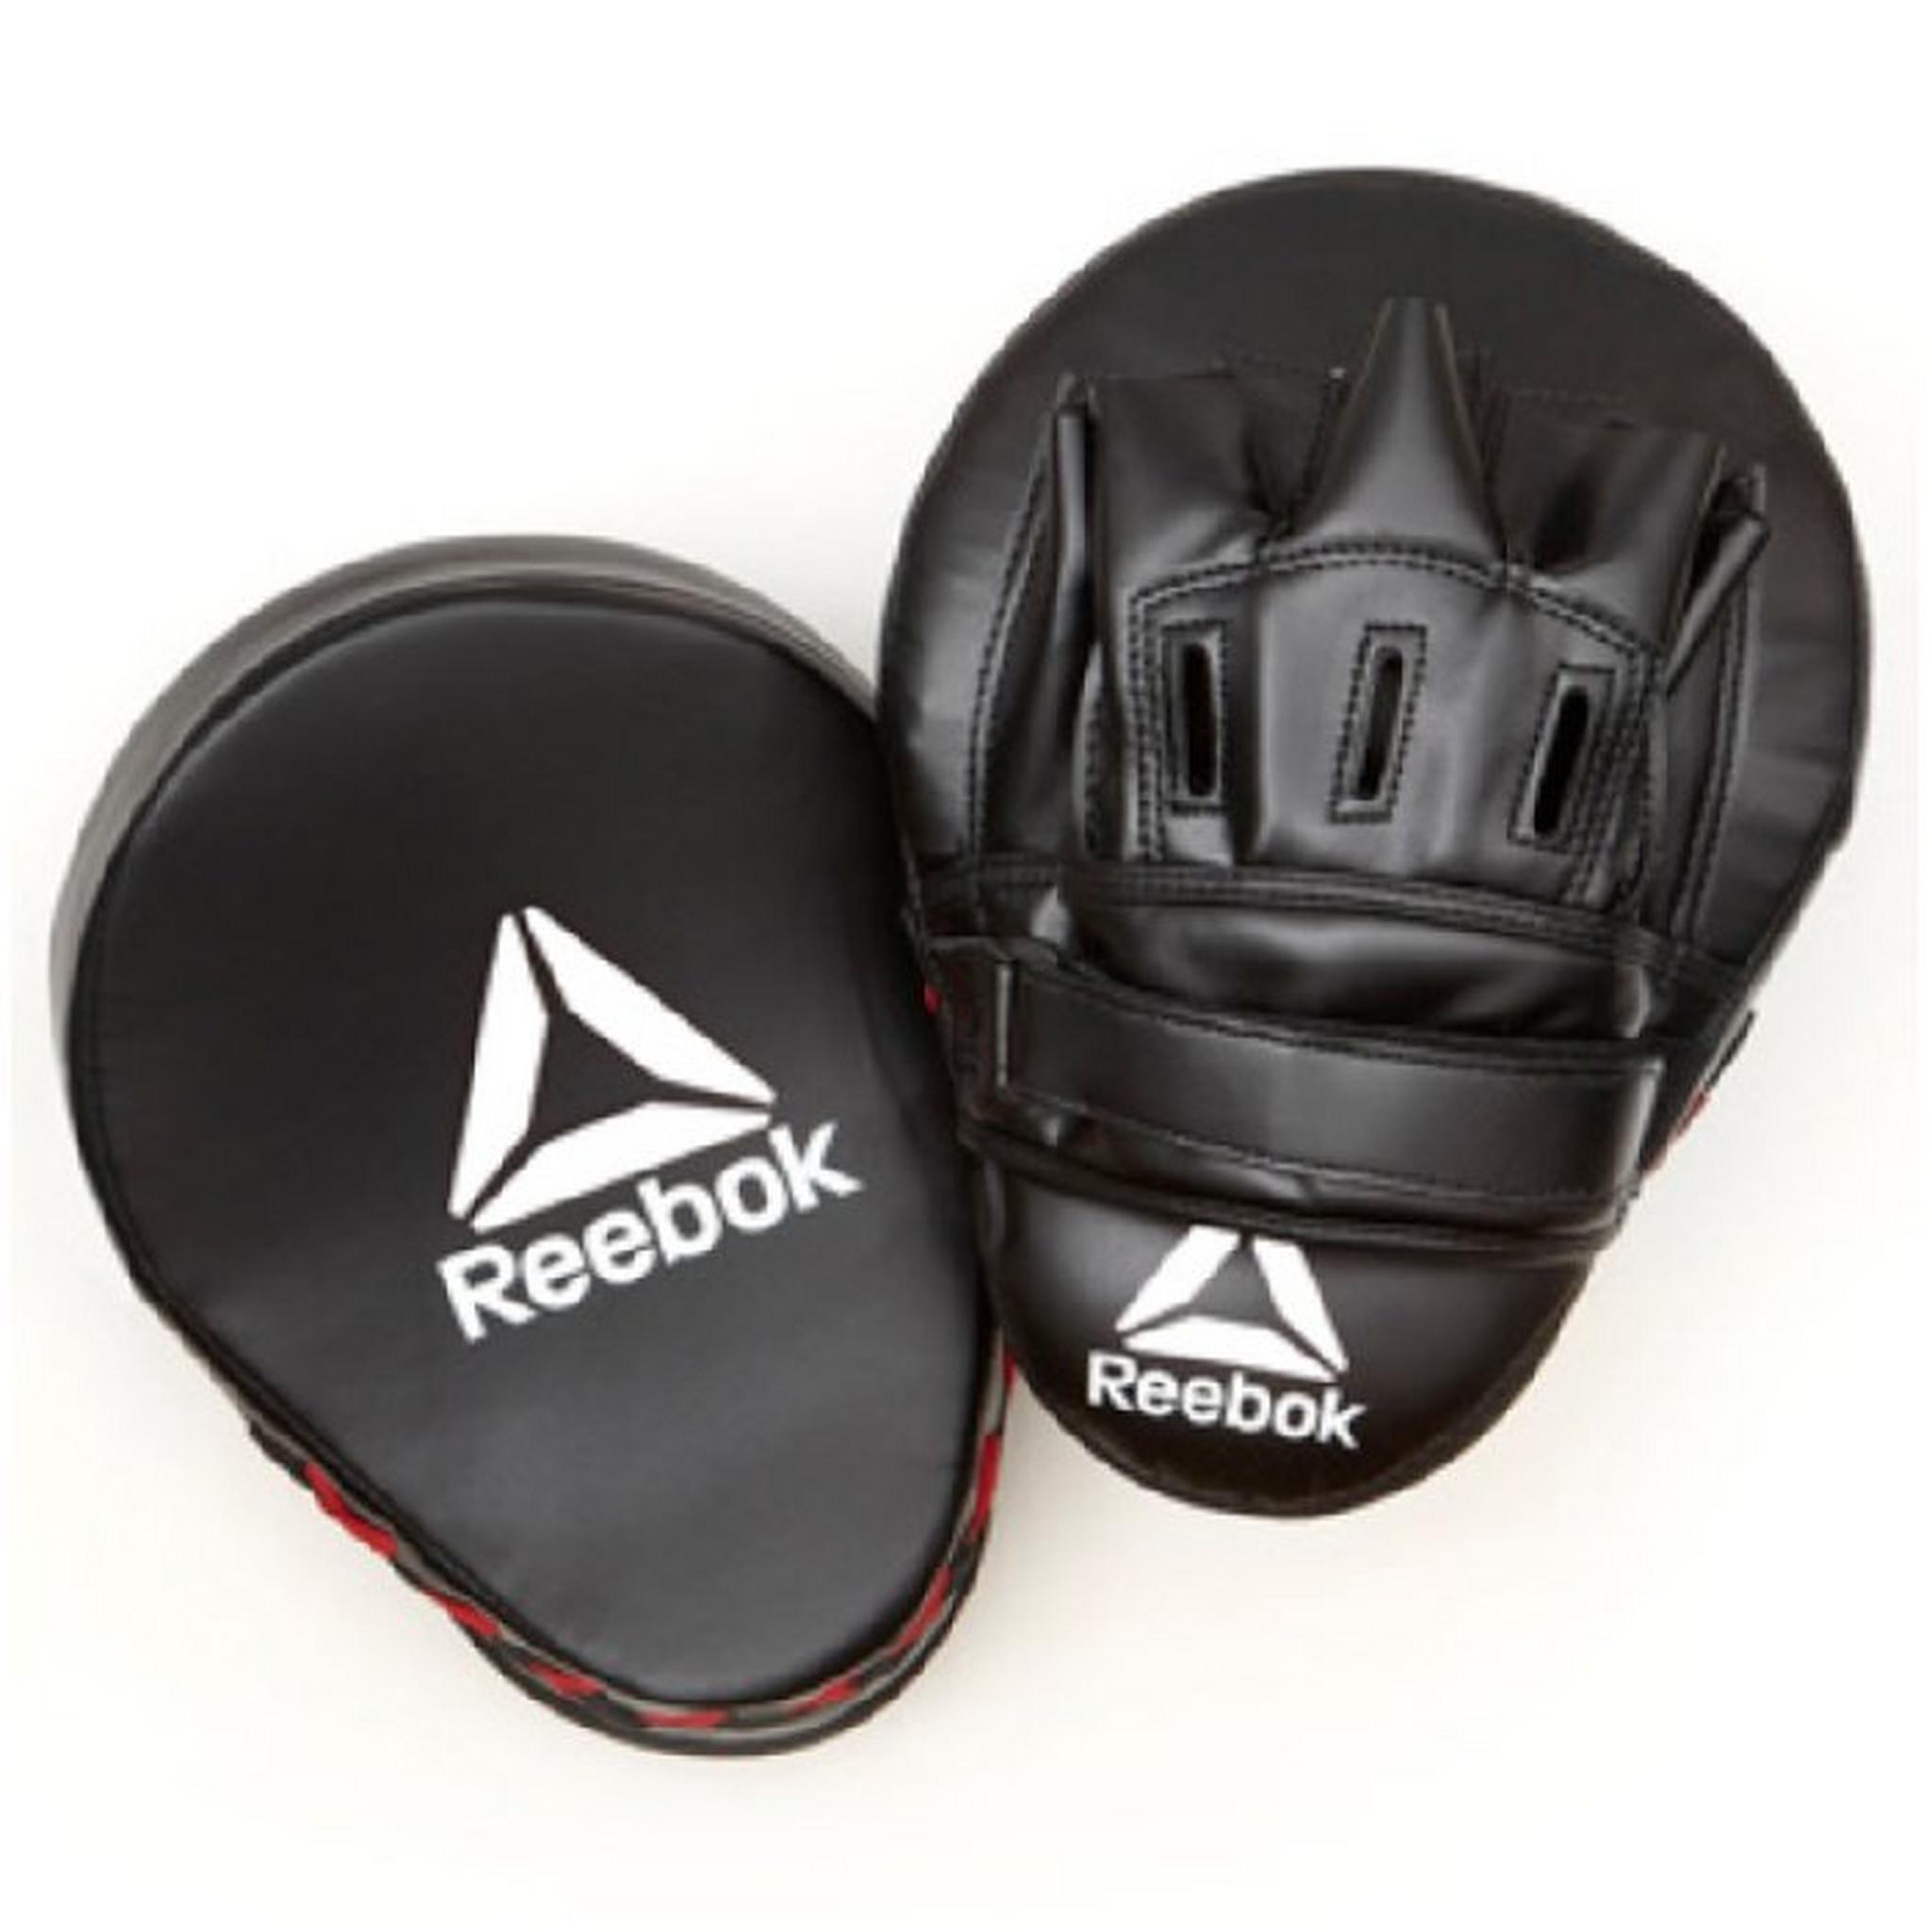 Reebok Retail Hook and Jab Pads, RSCB-11150RD - Red and Black